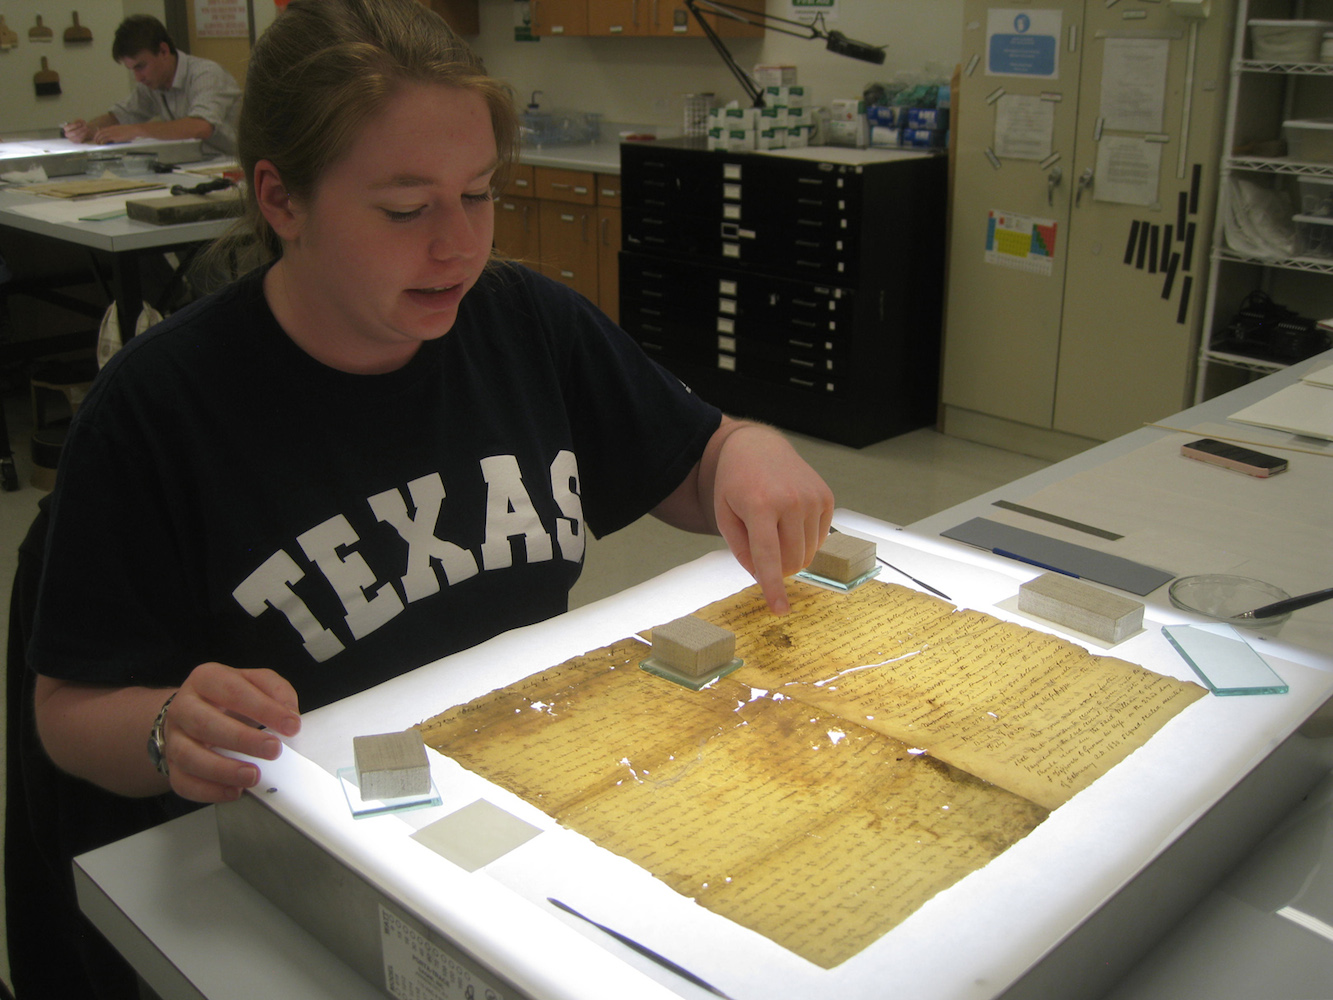 An archivist works at preserving an old text.